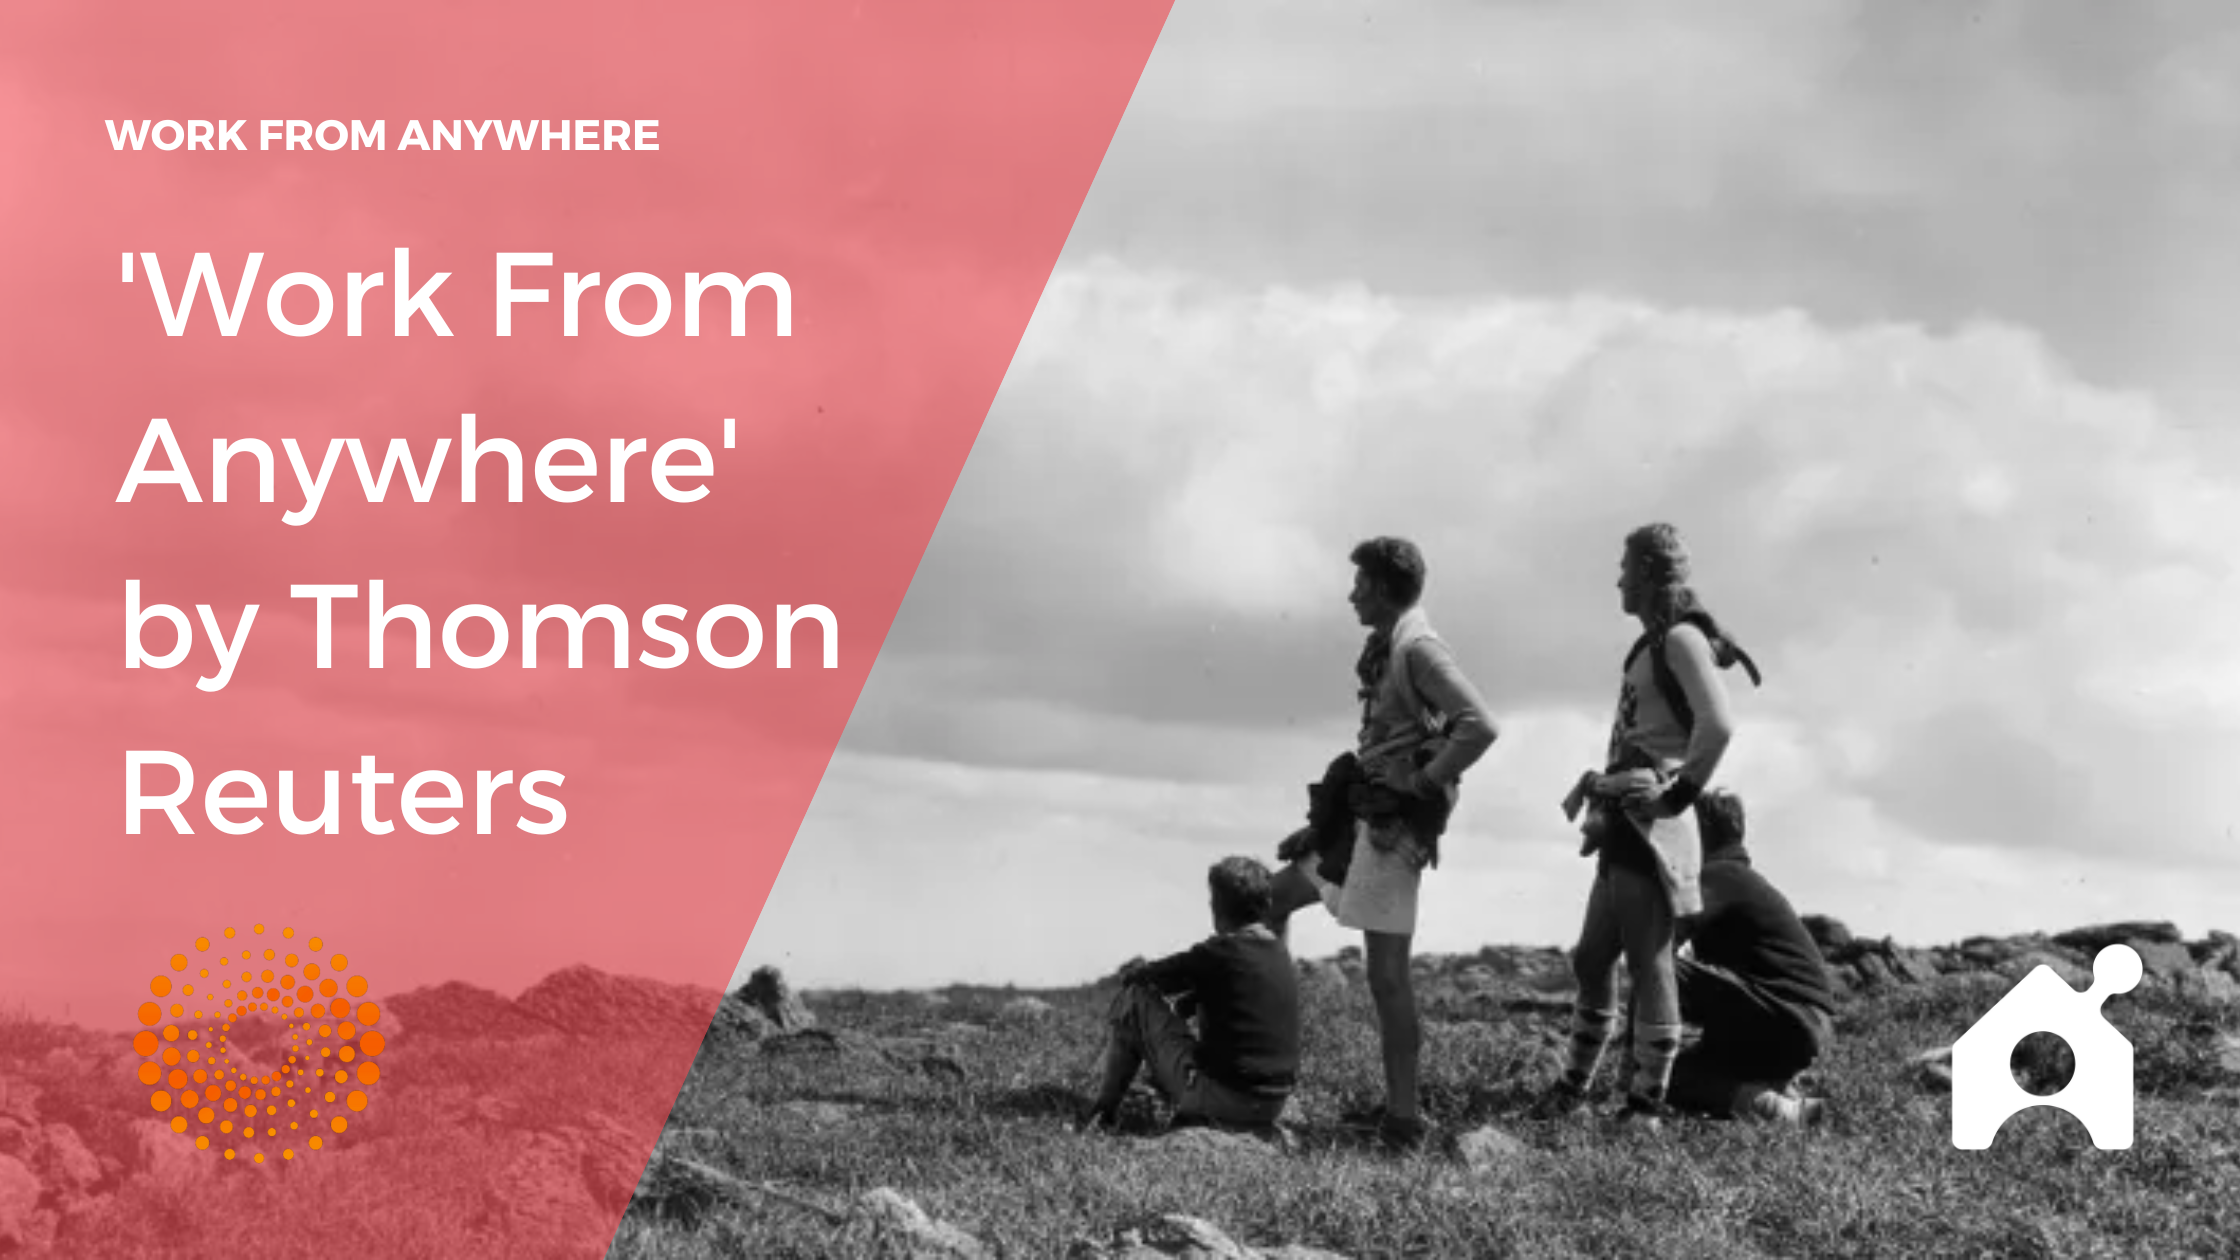 Work From Anywhere - Thomson Reuters